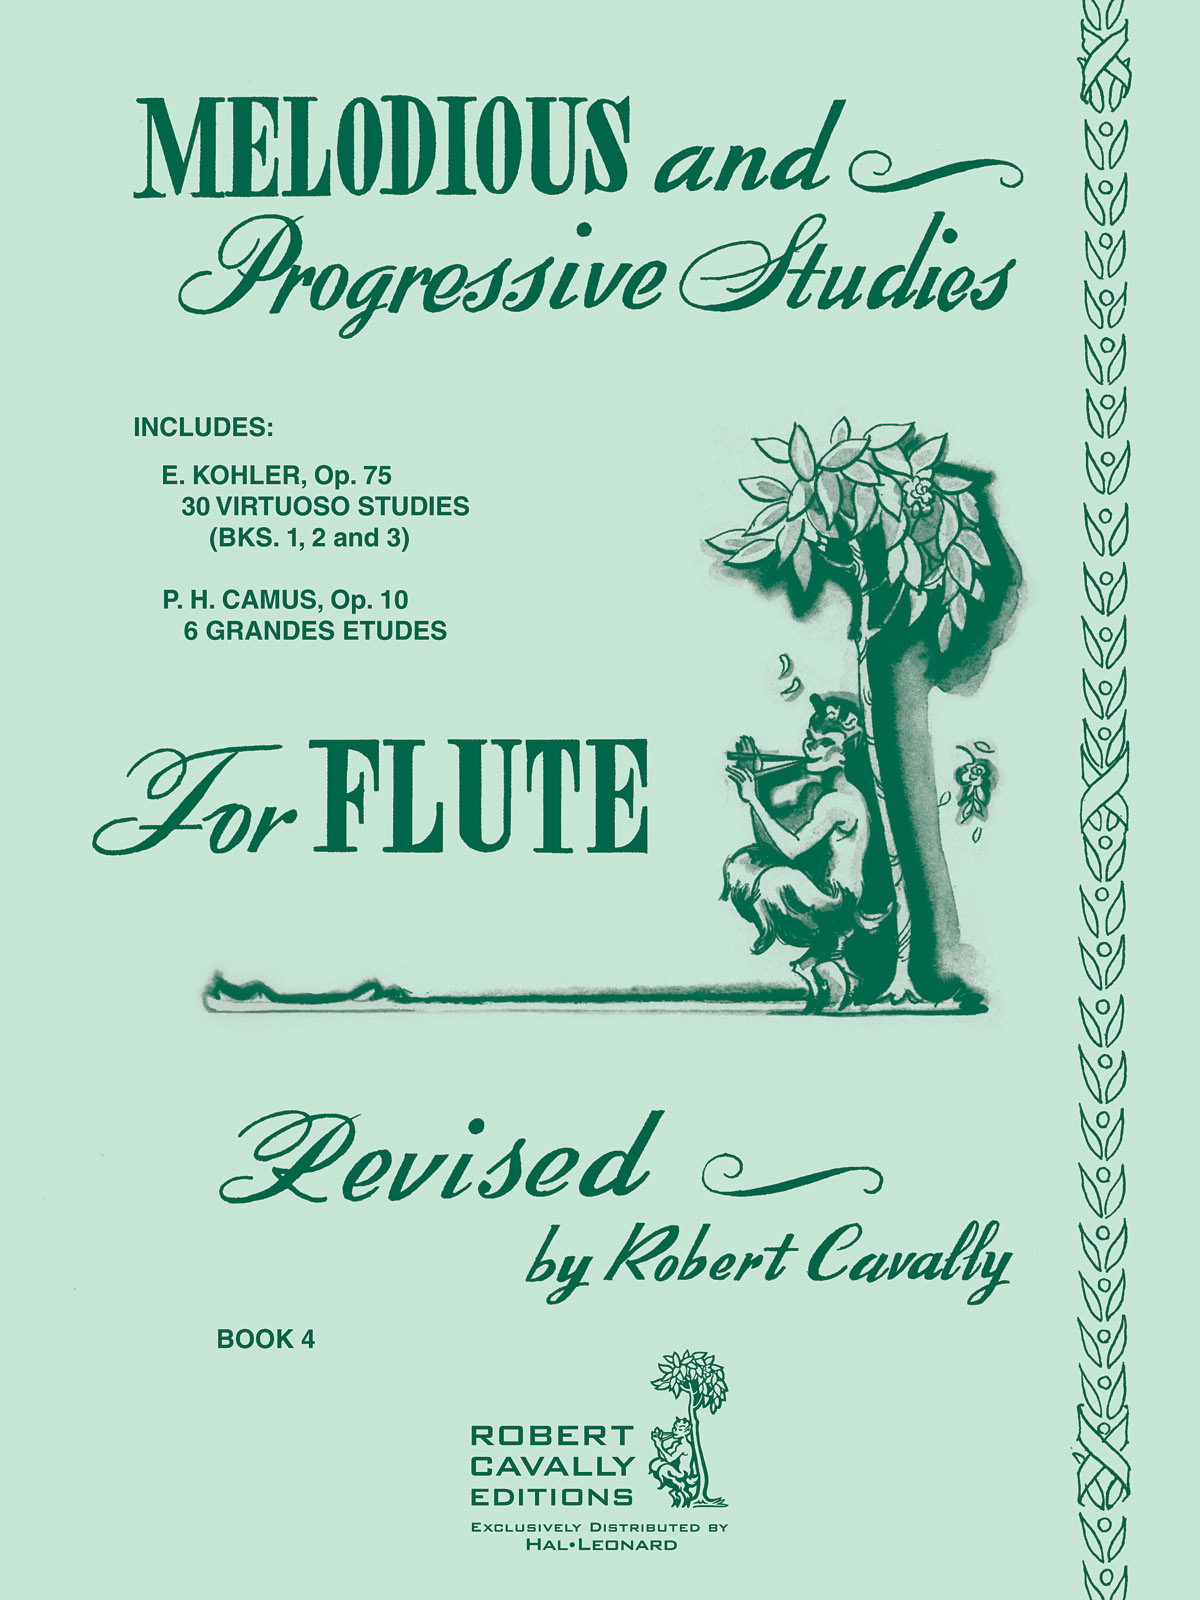 Robert Cavally: Melodious and Progressive Studies for Flute,Book 4